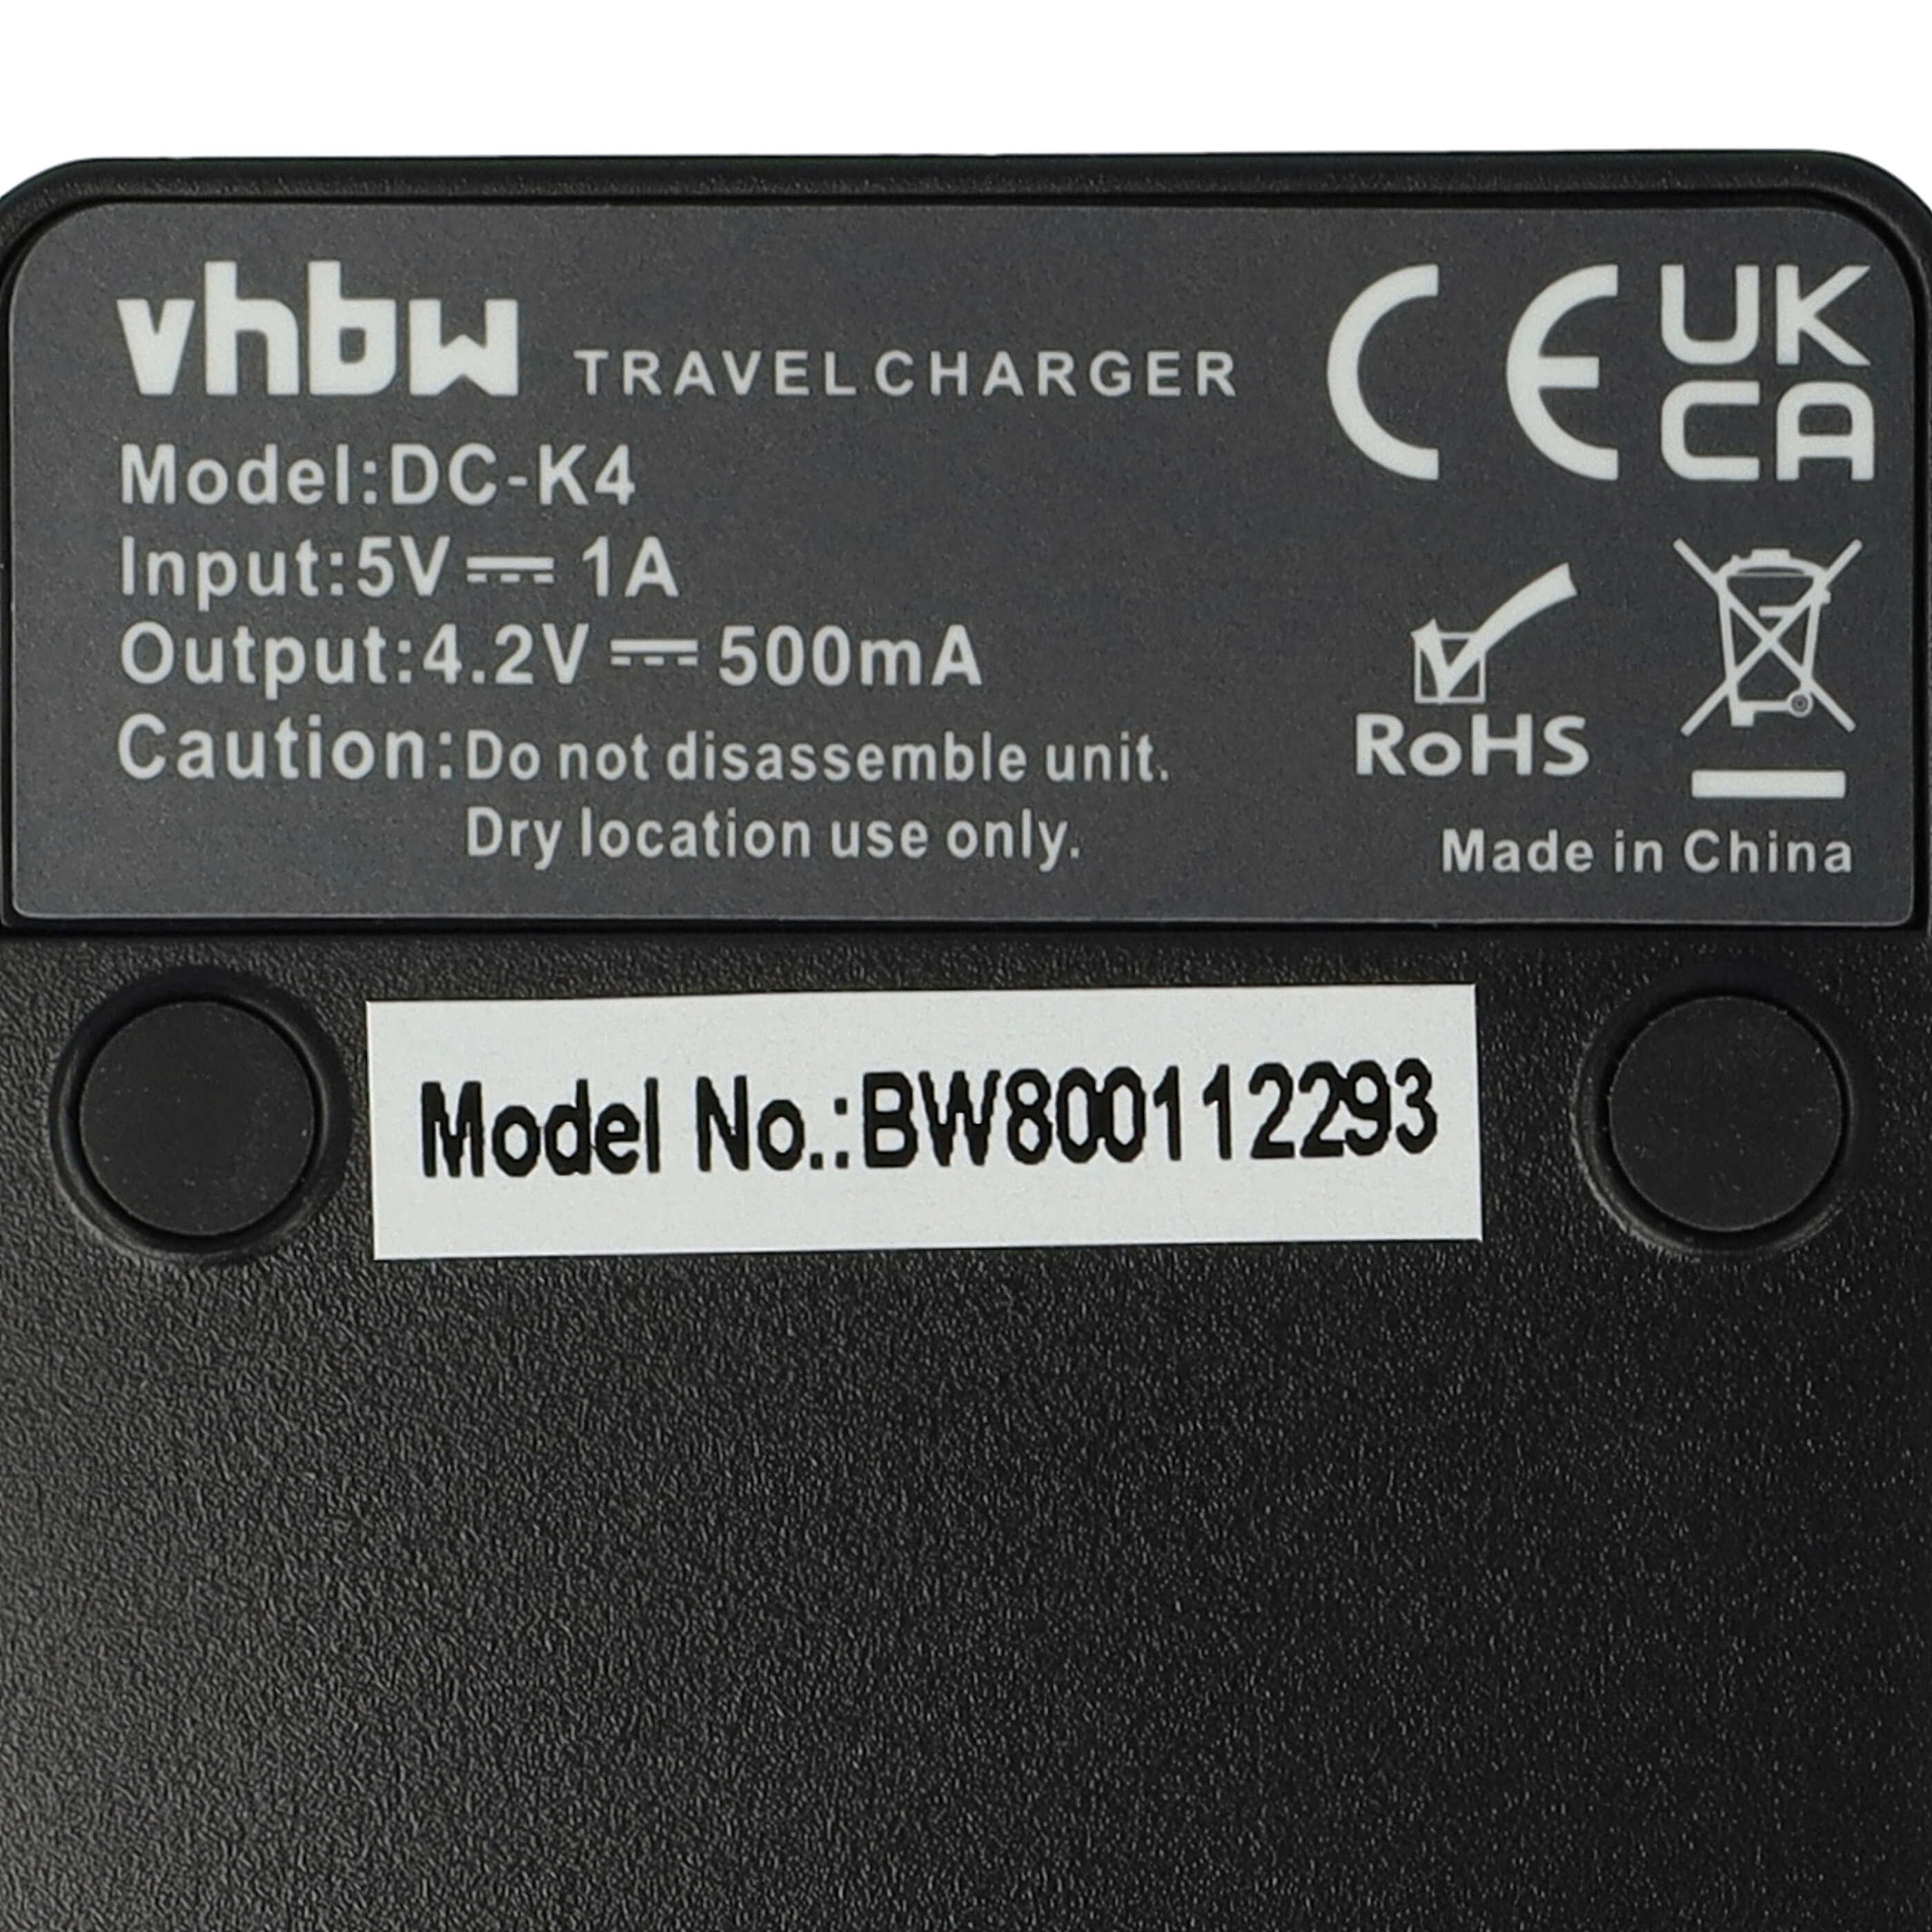 Battery Charger suitable for Samsung SLB-0937 Camera etc. - 0.5 A, 4.2 V